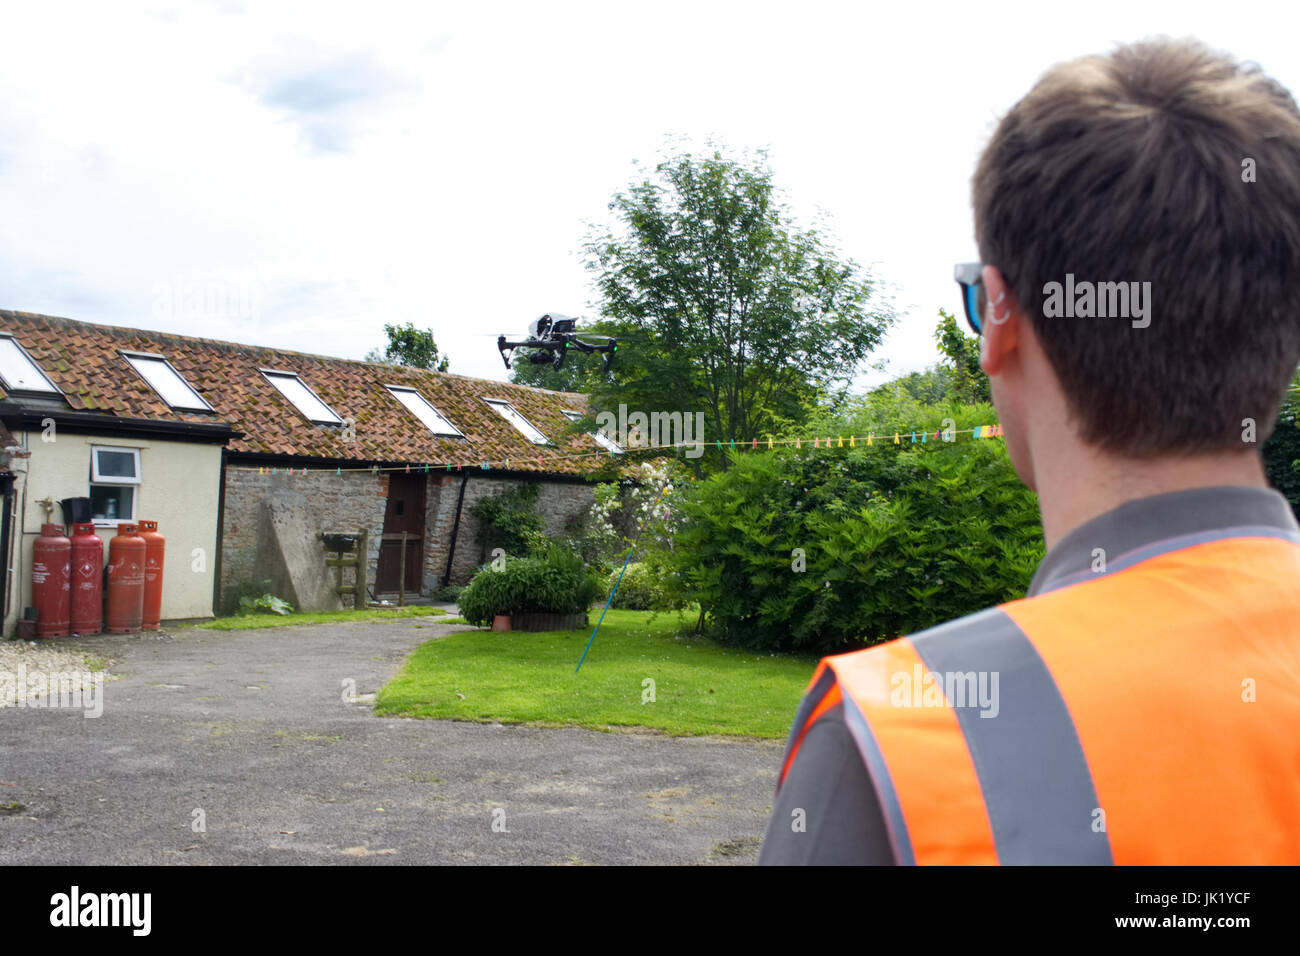 Licensed Drone Operator flying DJI Inspire 1 at a property in the UK Stock Photo